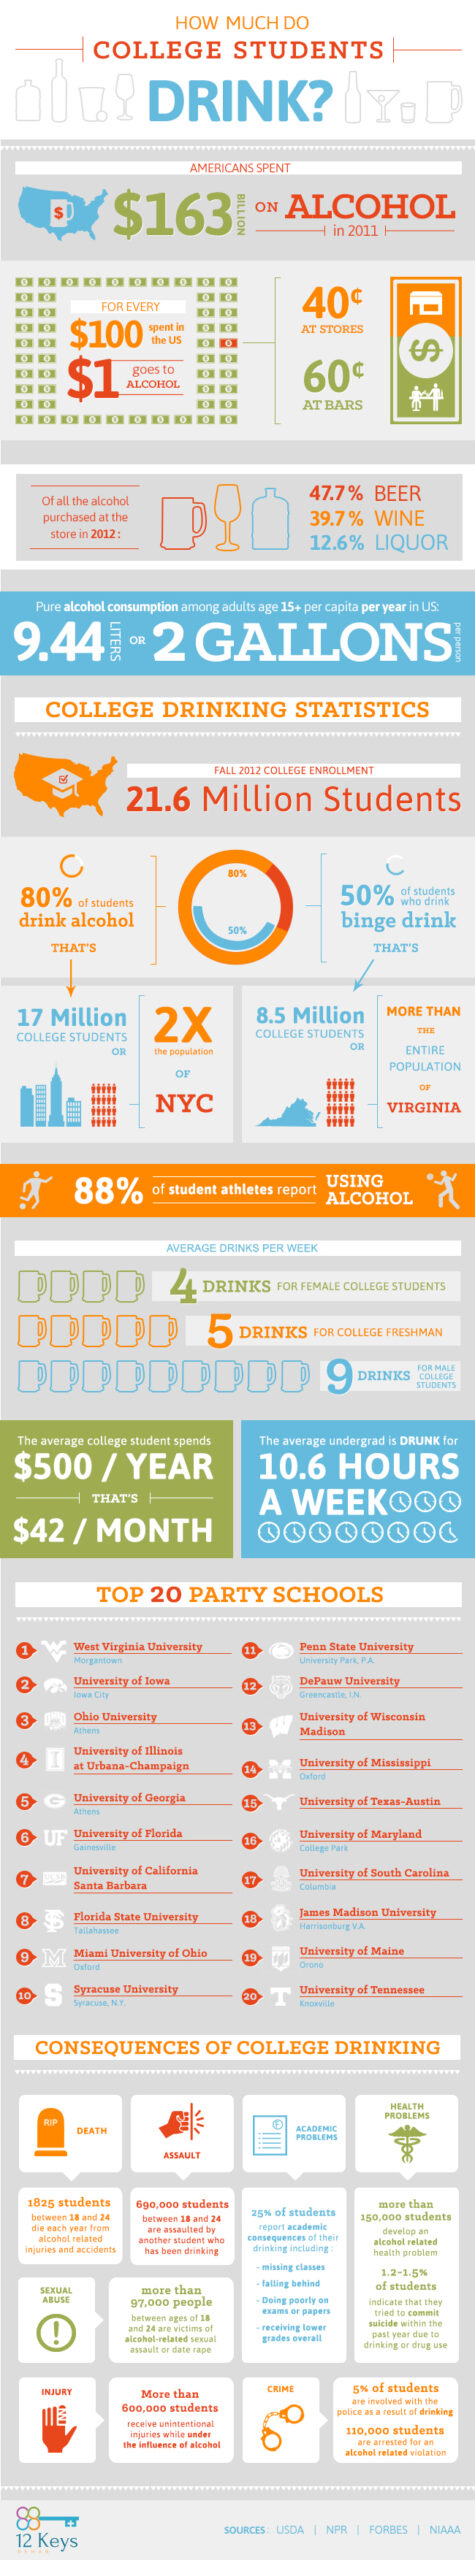 How Much Do College Students Drink? INFOGRAPHIC